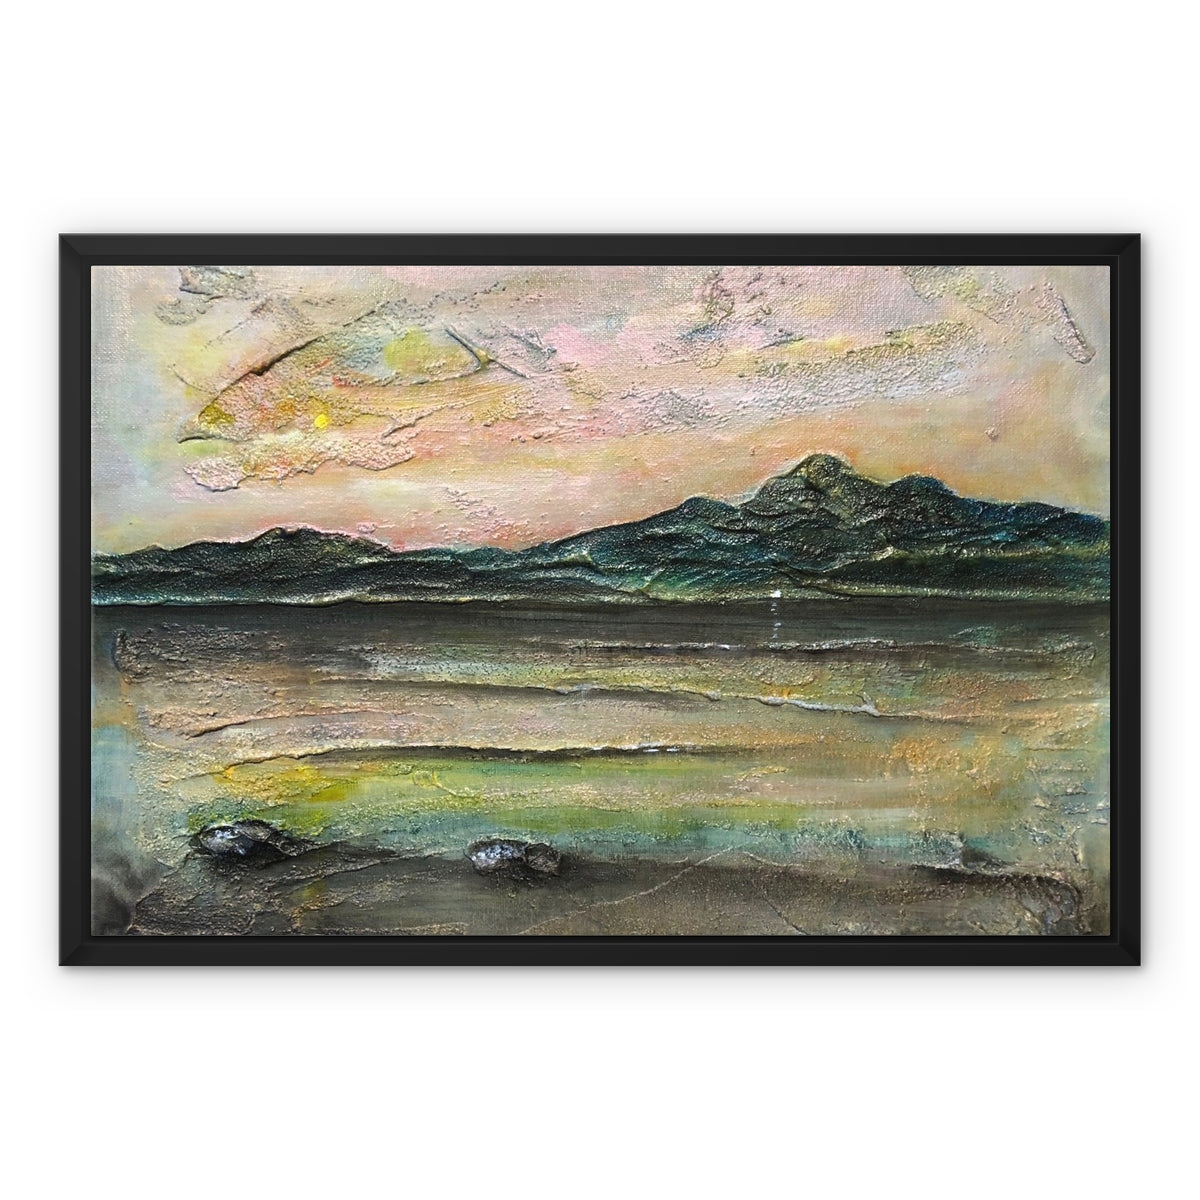 An Ethereal Loch Na Dal Skye Painting | Framed Canvas From Scotland-Floating Framed Canvas Prints-Scottish Lochs & Mountains Art Gallery-24"x18"-Black Frame-Paintings, Prints, Homeware, Art Gifts From Scotland By Scottish Artist Kevin Hunter